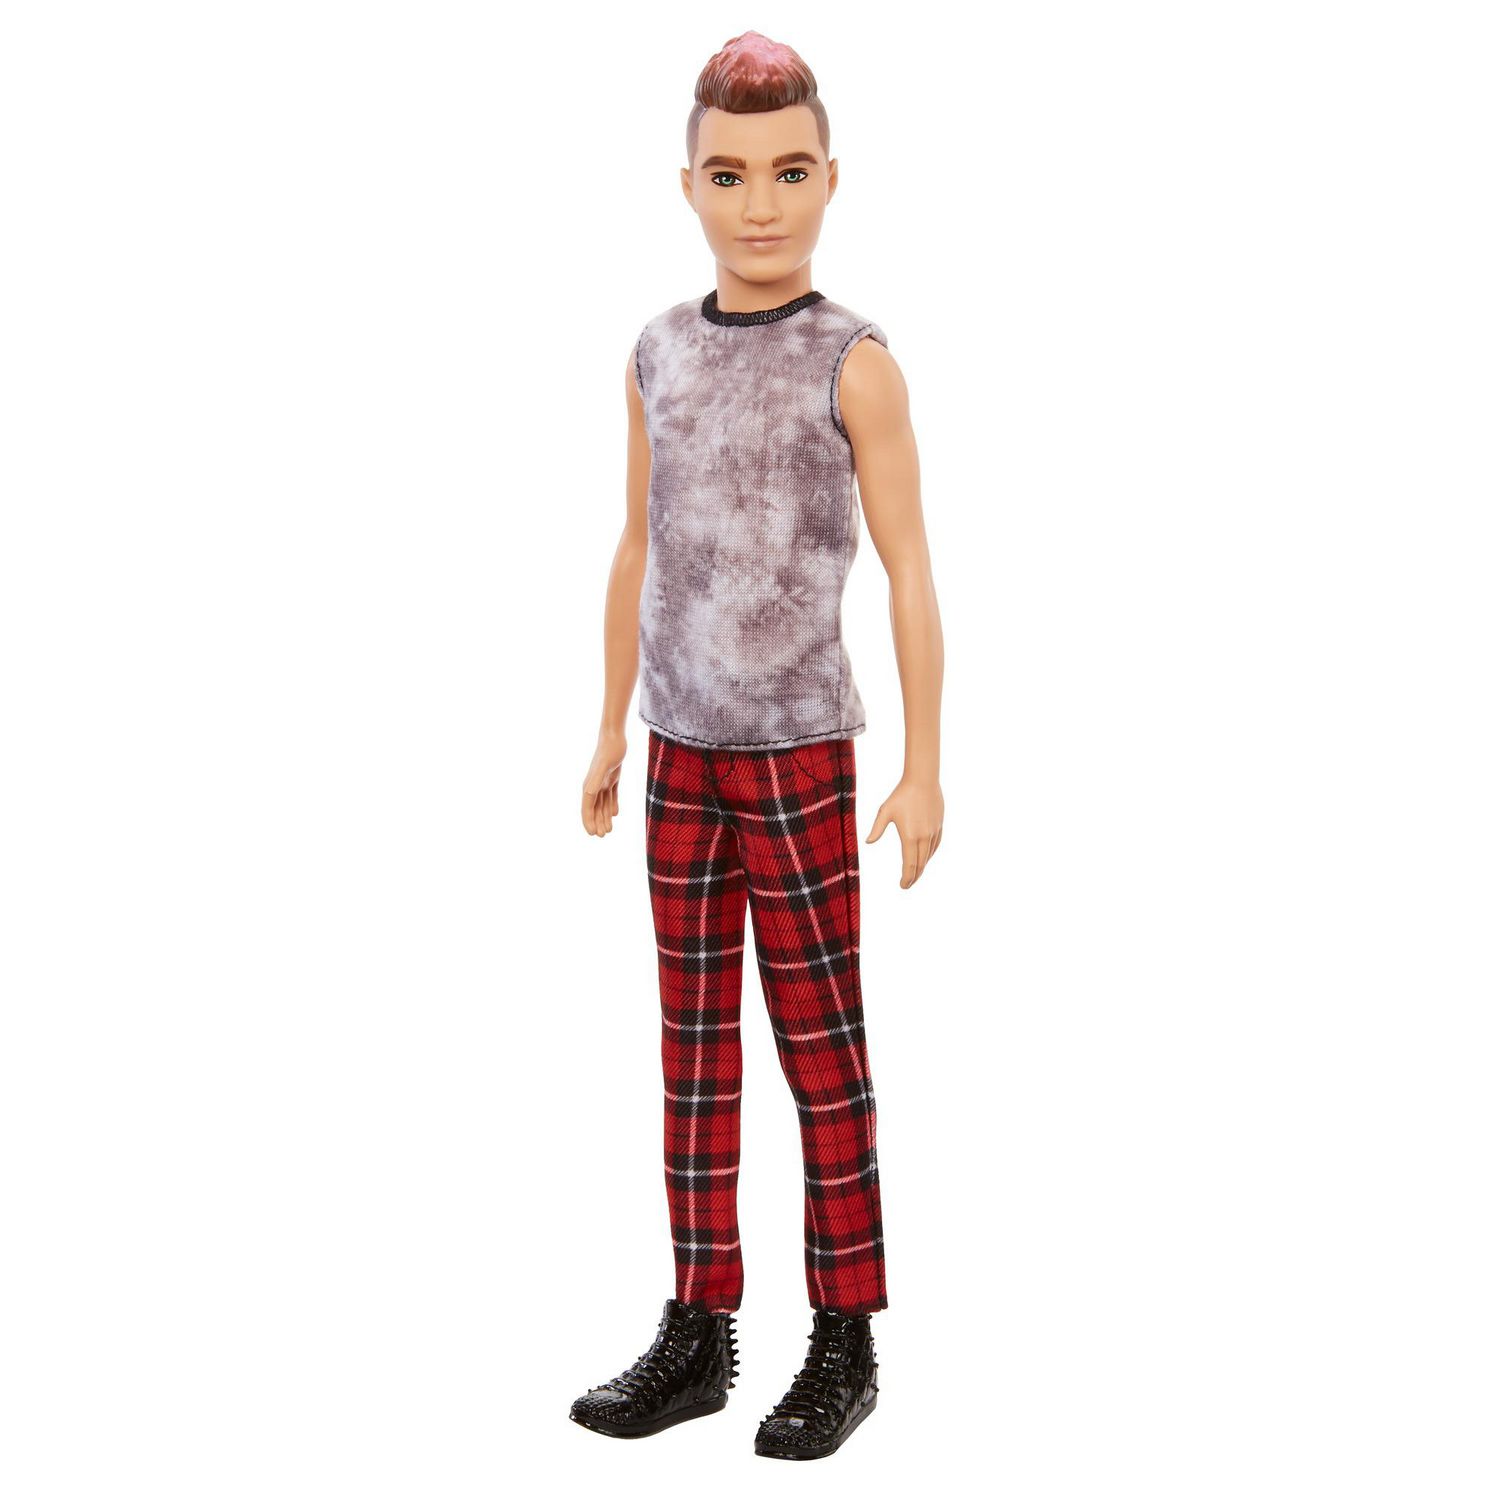 Barbie Ken Fashionistas Doll with Sculpted Brunette Ombre-tipped